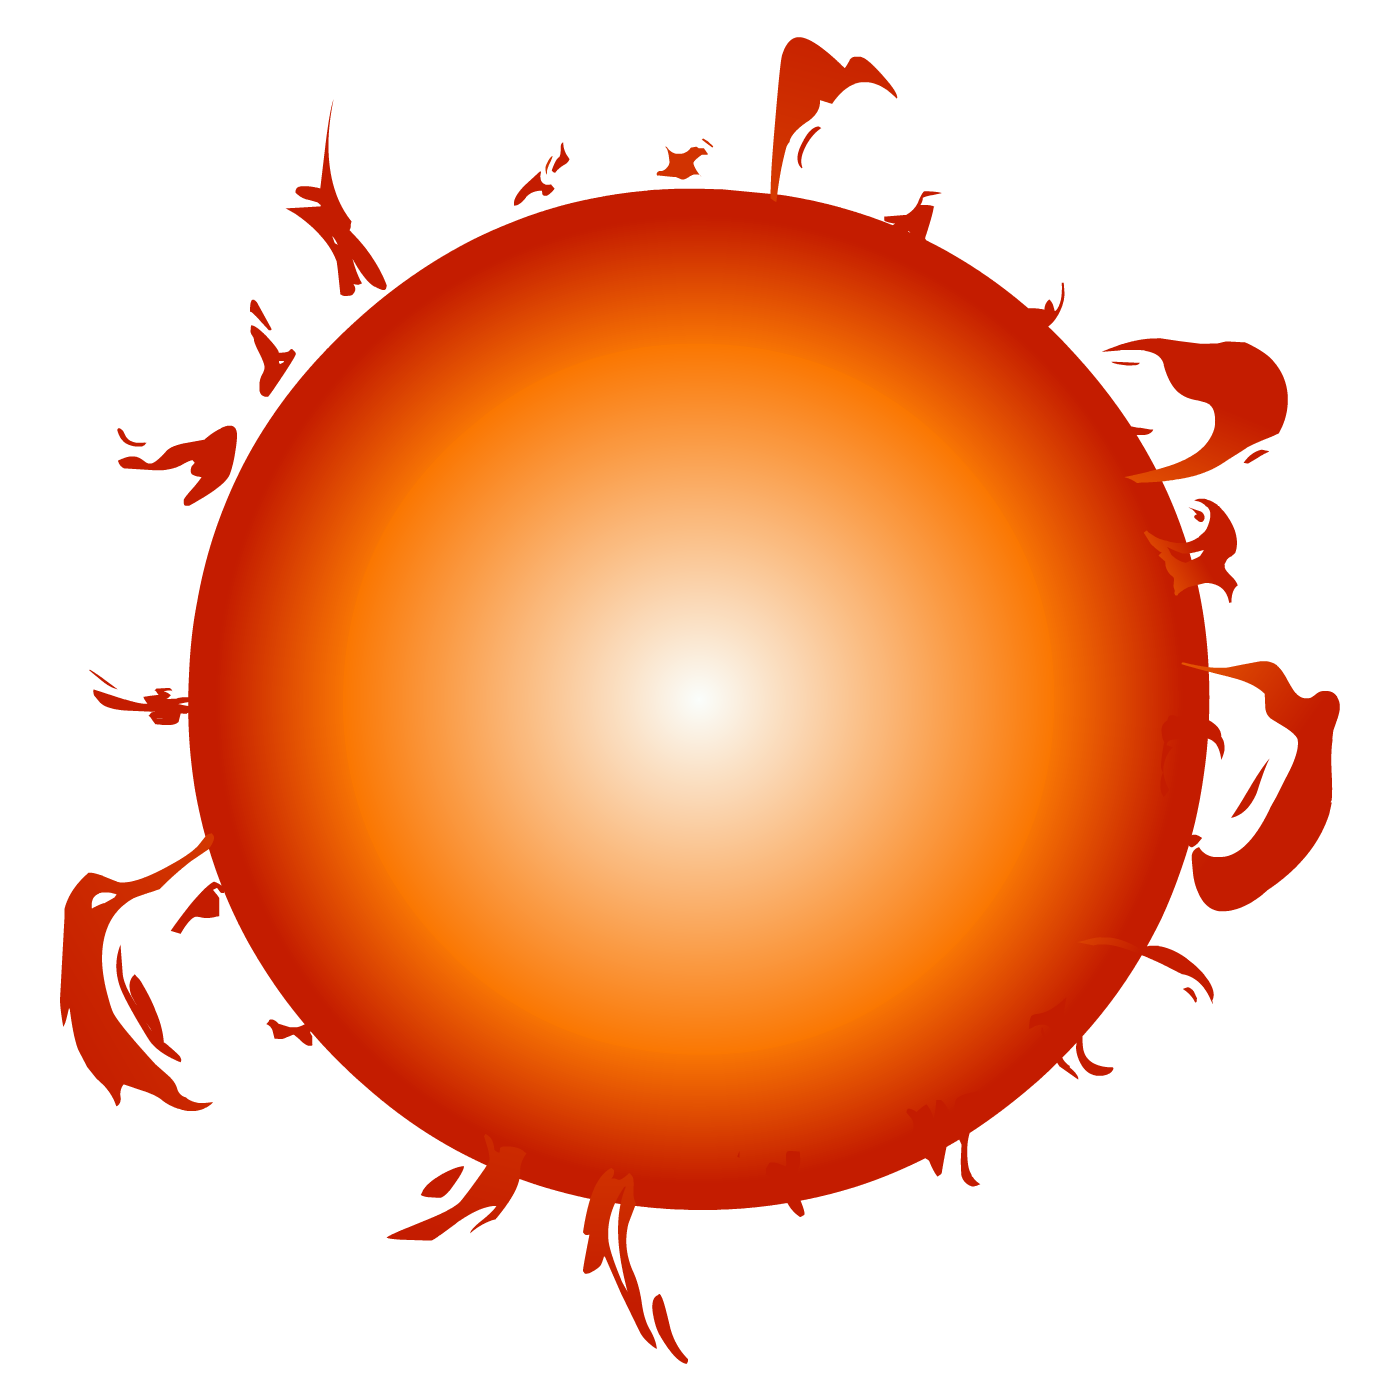 planets clipart planet mars